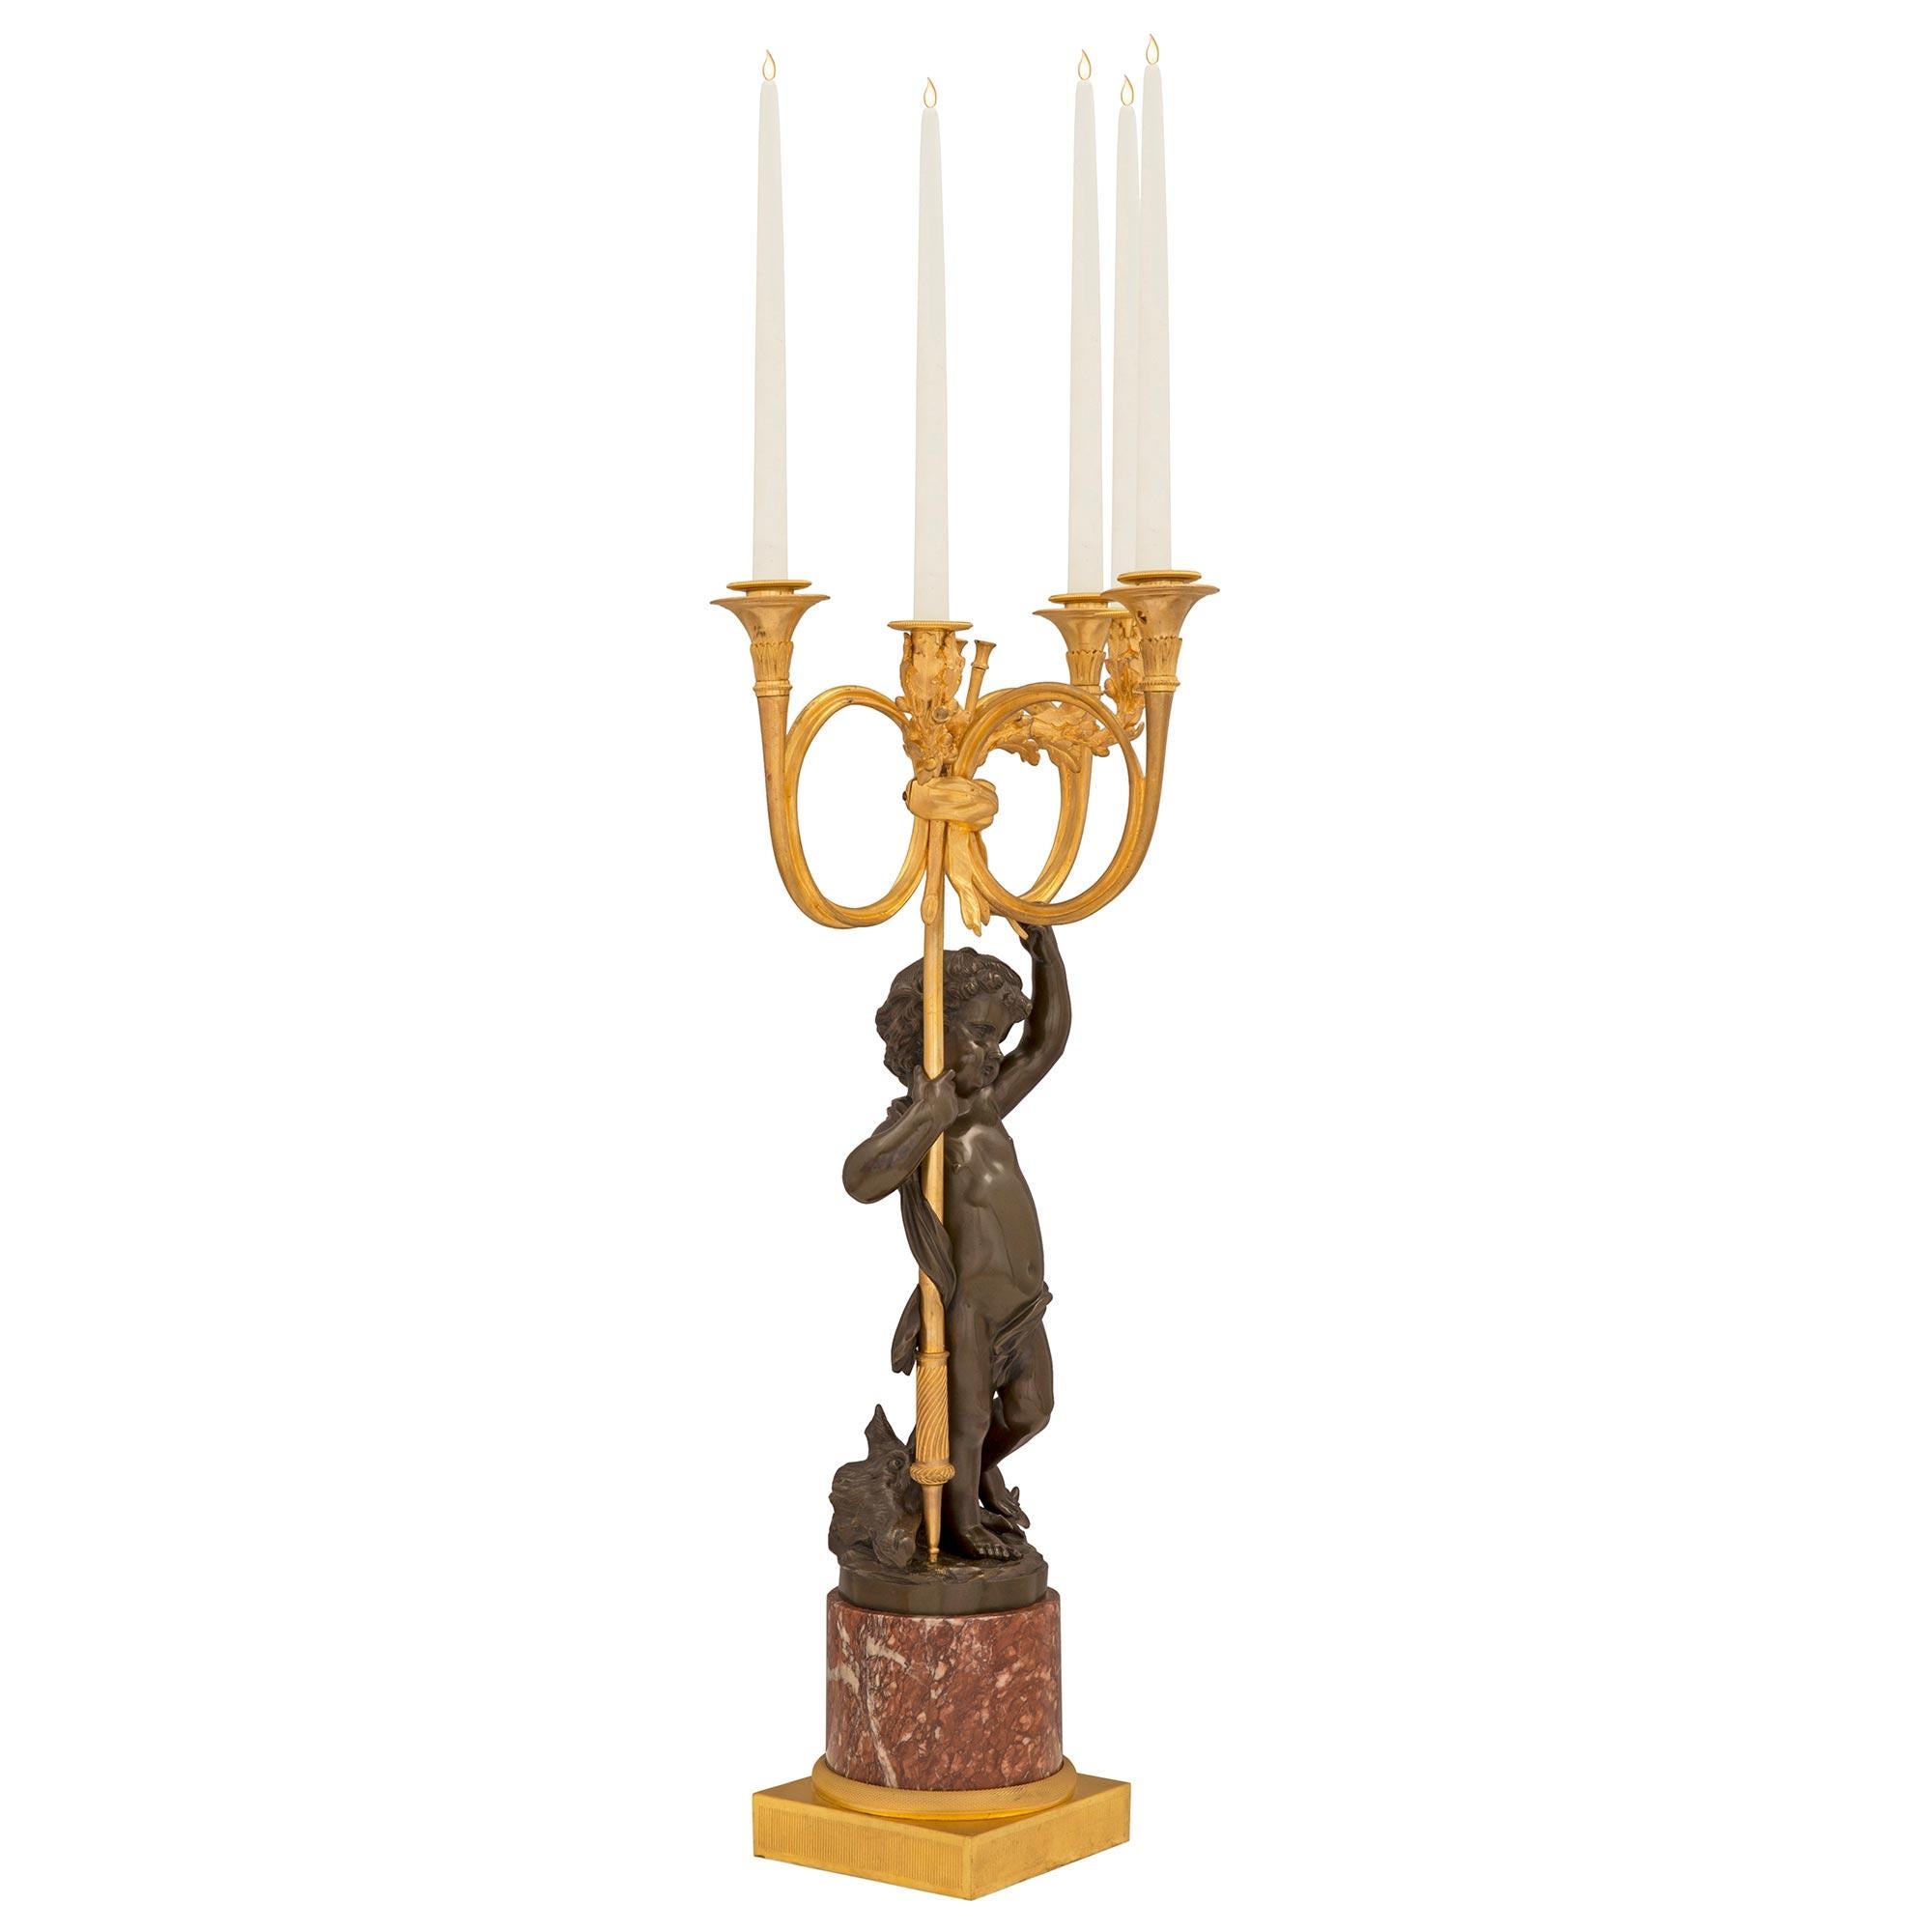 A charming and very high quality true pair of French 19th century Louis XVI st. ormolu, patinated bronze, and Rouge Royale marble candelabras. Each large scale five arm candelabra is raised by a fine square ormolu base and elegant circular Rouge